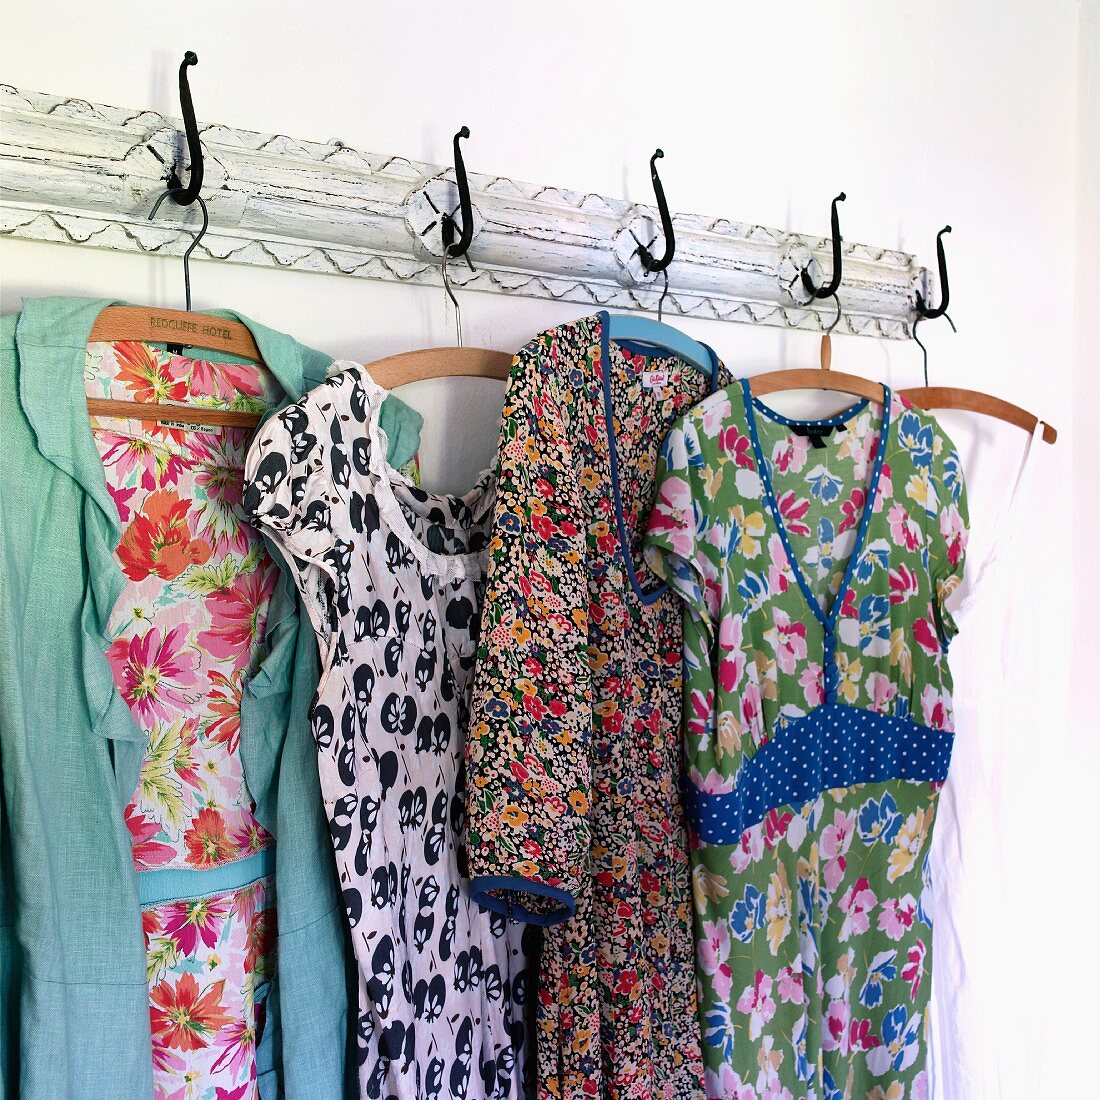 Colourful, floral dresses and pinafores hanging on old, vintage-style coat rack